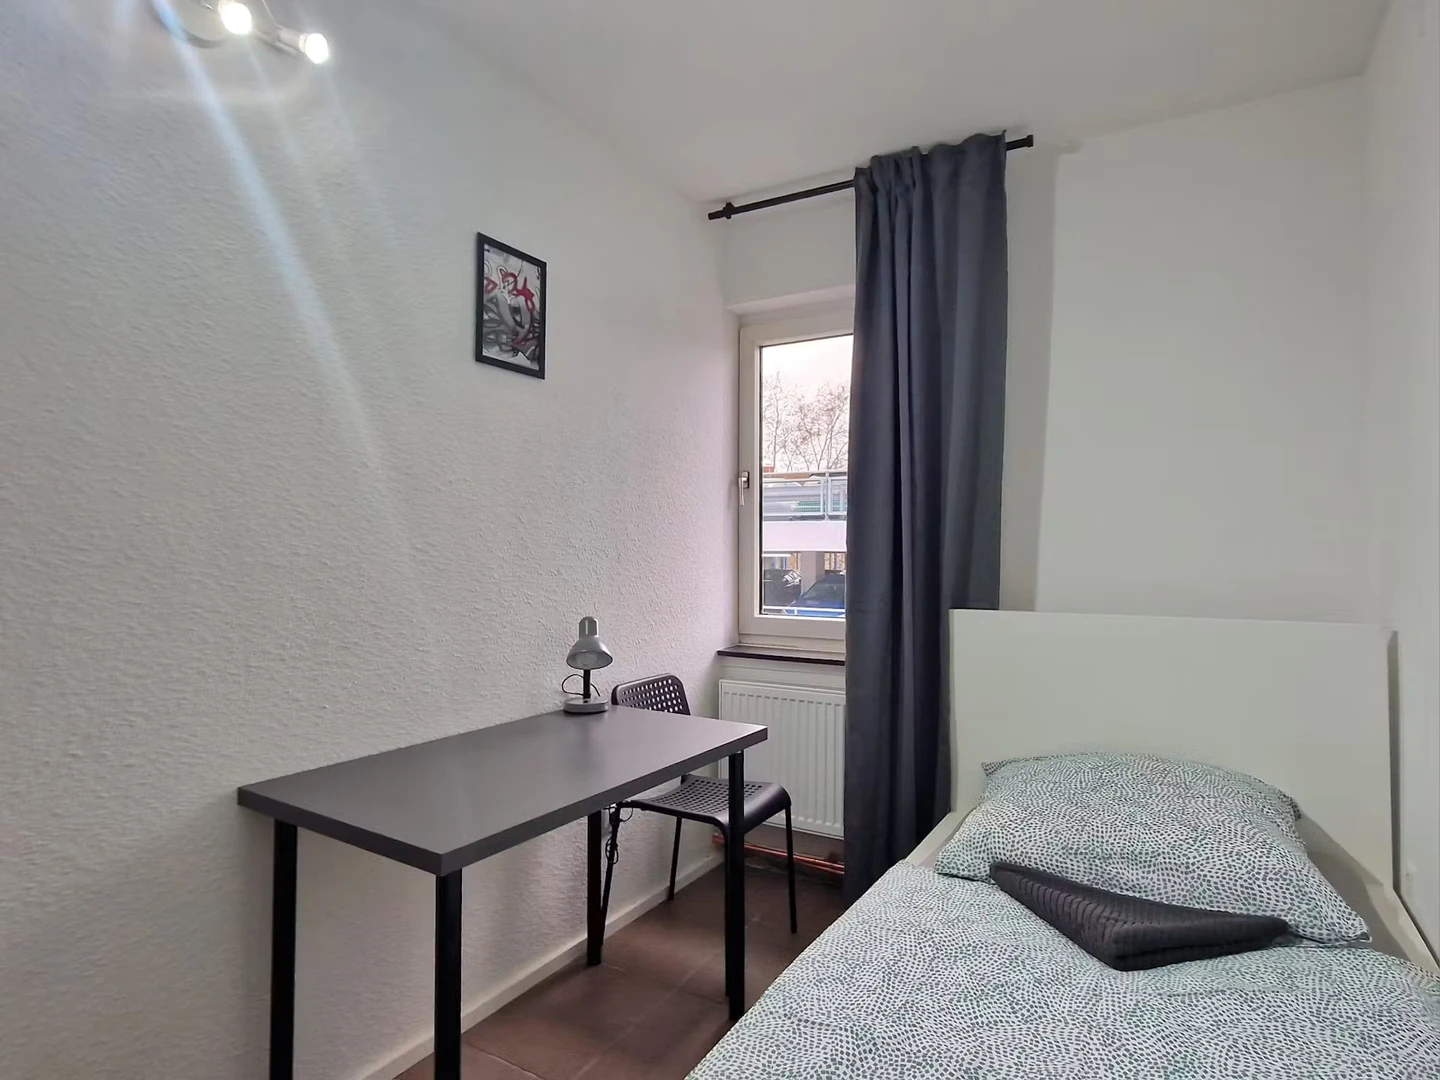 Room for rent in a shared flat in Dortmund